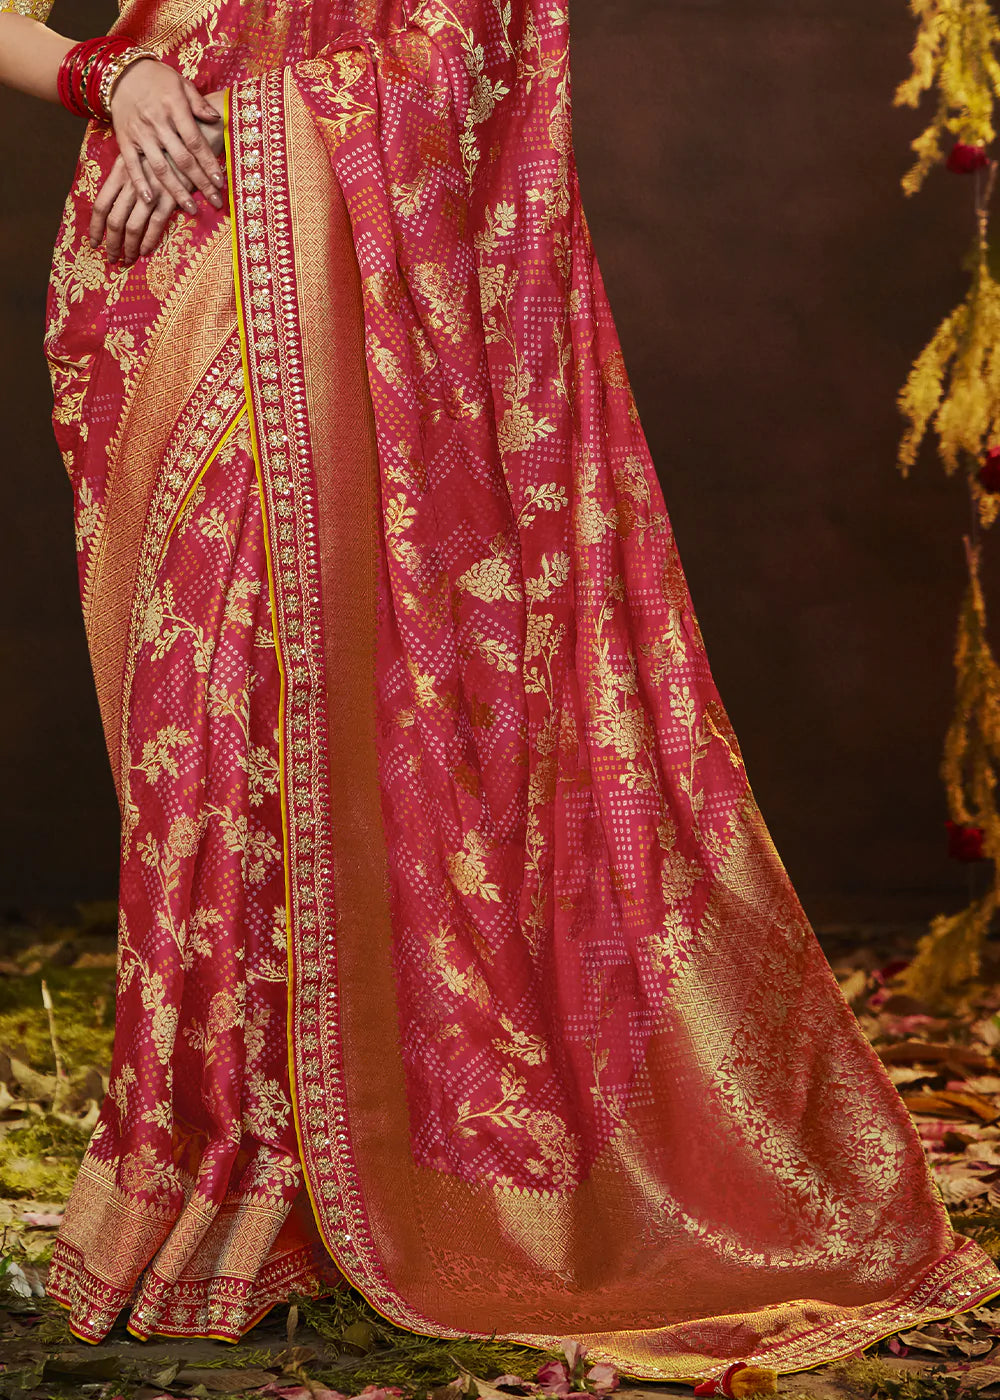 Buy MySilkLove Froly Pink Woven Georgette Designer Saree with Embroidered Blouse Online